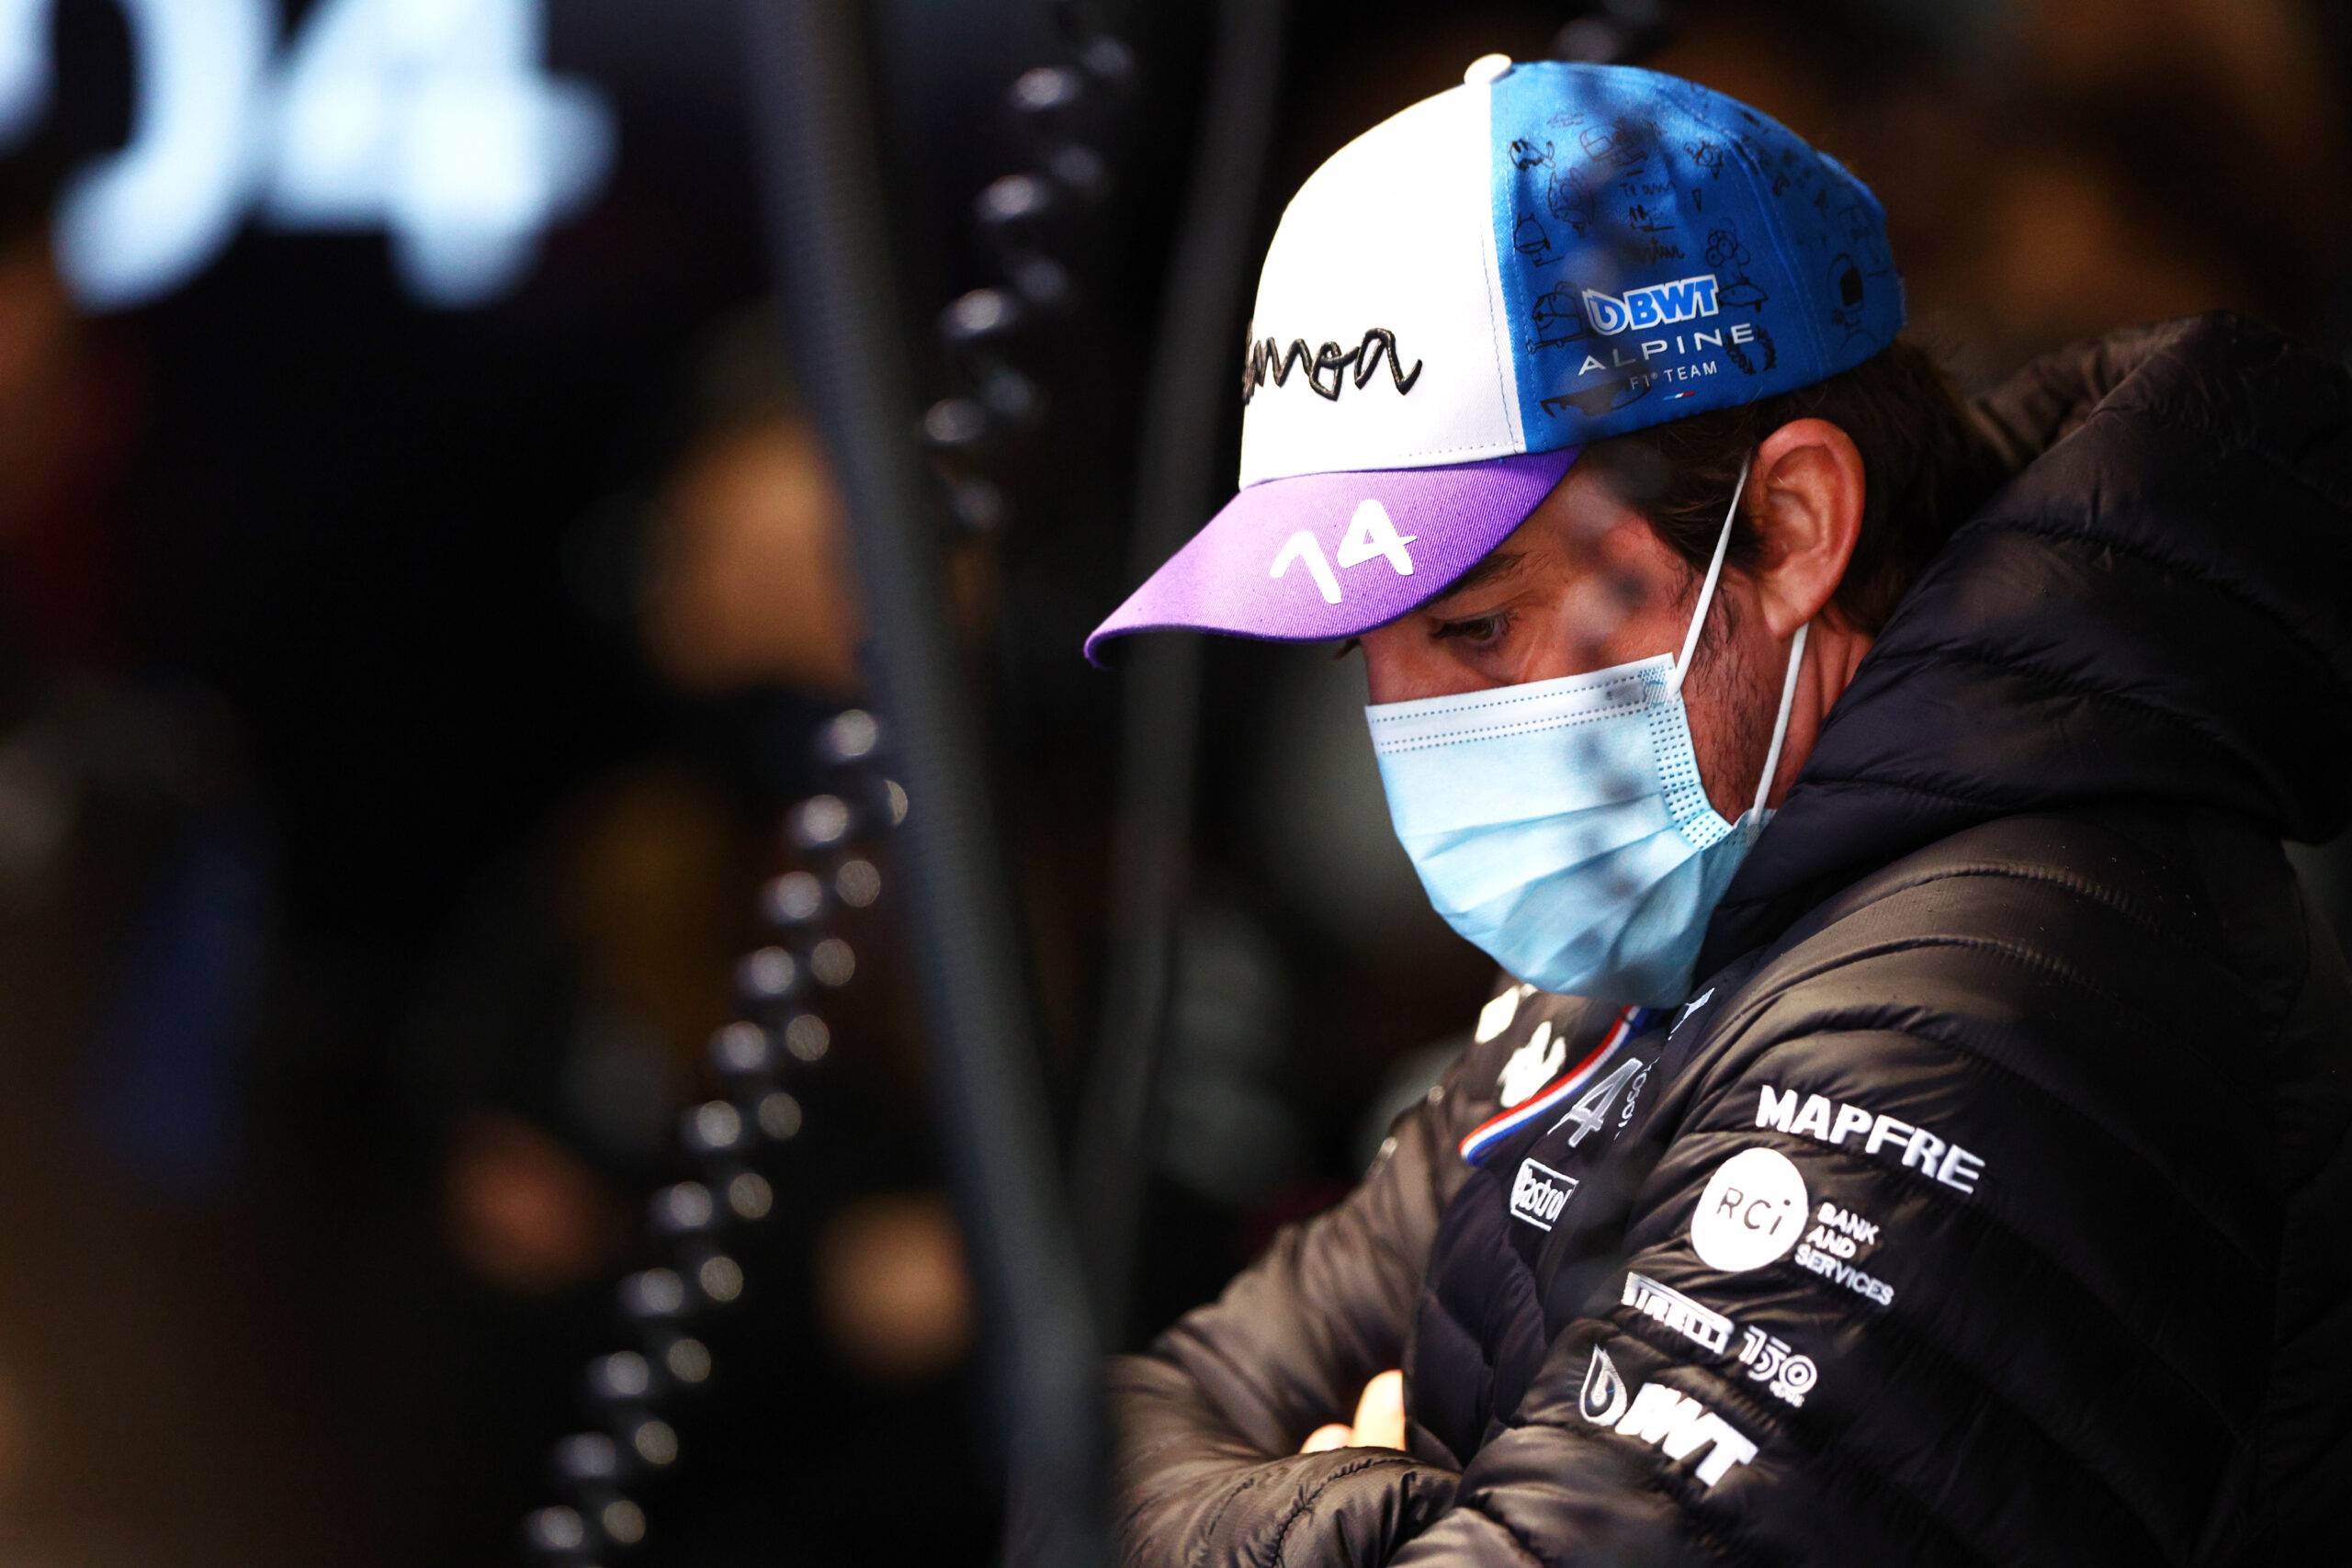 Fernando Alonso looks on in first practice at the Japanese GP